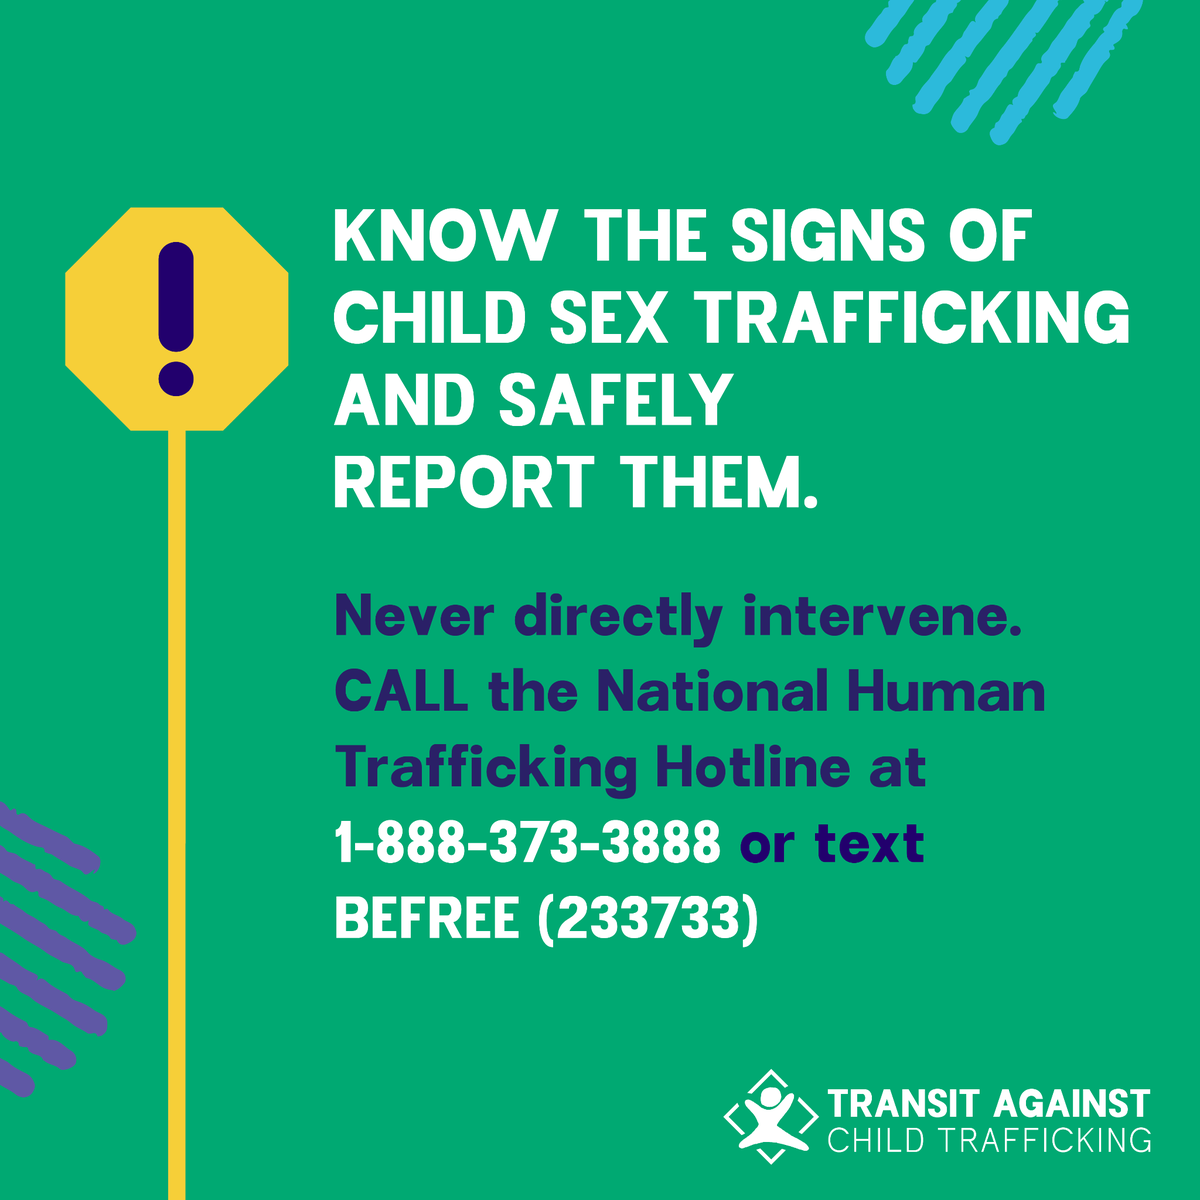 FACT: Child traffickers utilize buses, trains and other forms of public transit to transport their victims. Together, we can stop trafficking if we #KnowTheSigns. Learn more: wearepact.org/tact-campaign